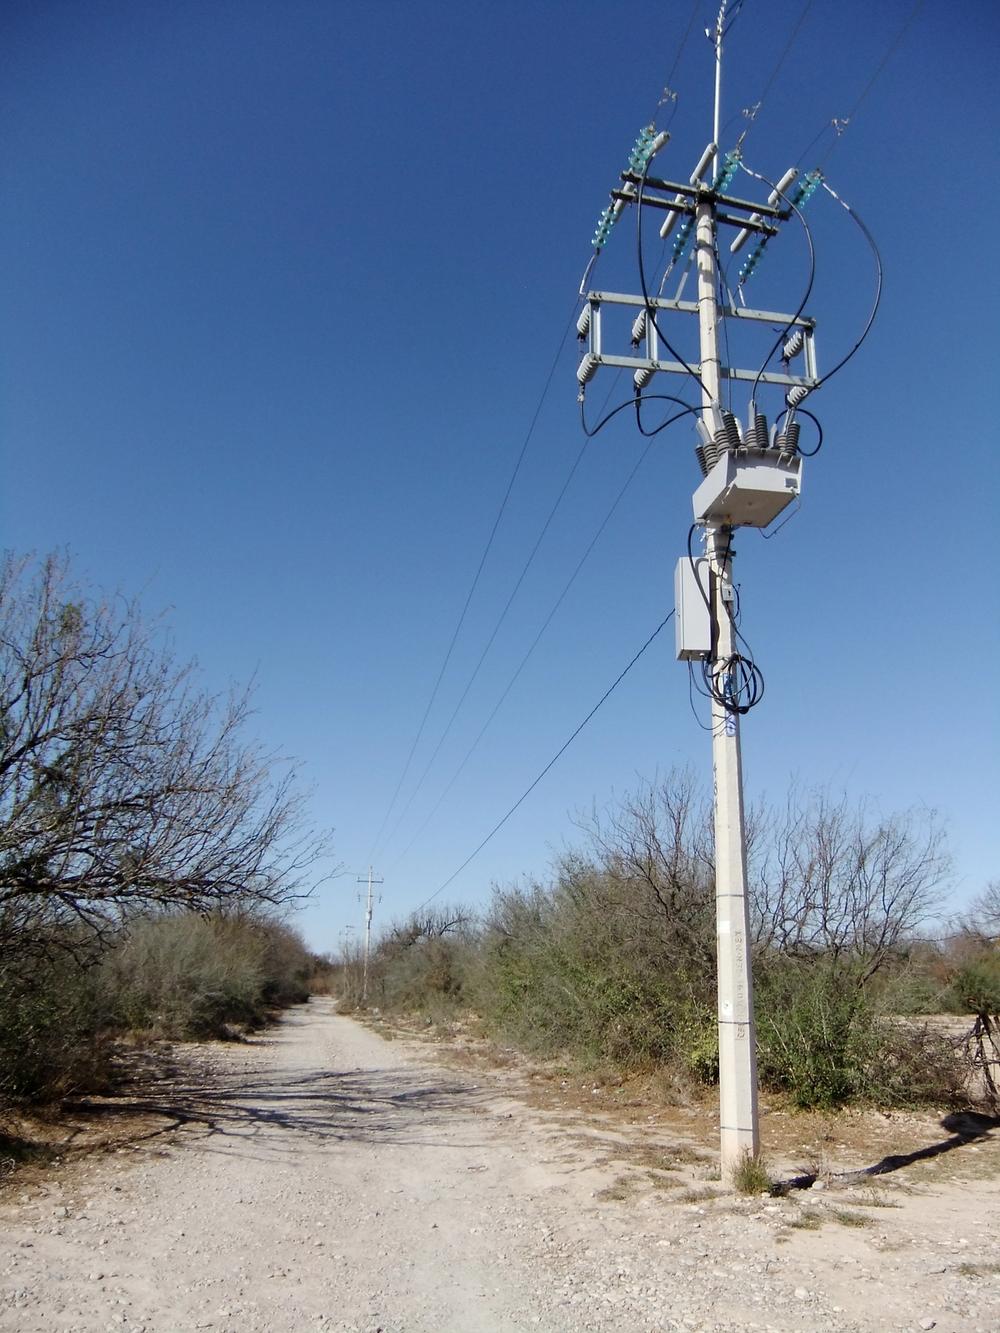 Pole mounted NOJA Power OSM Recloser Installation on the side of gravel road, with clear blue skies and shrubbery lining the road